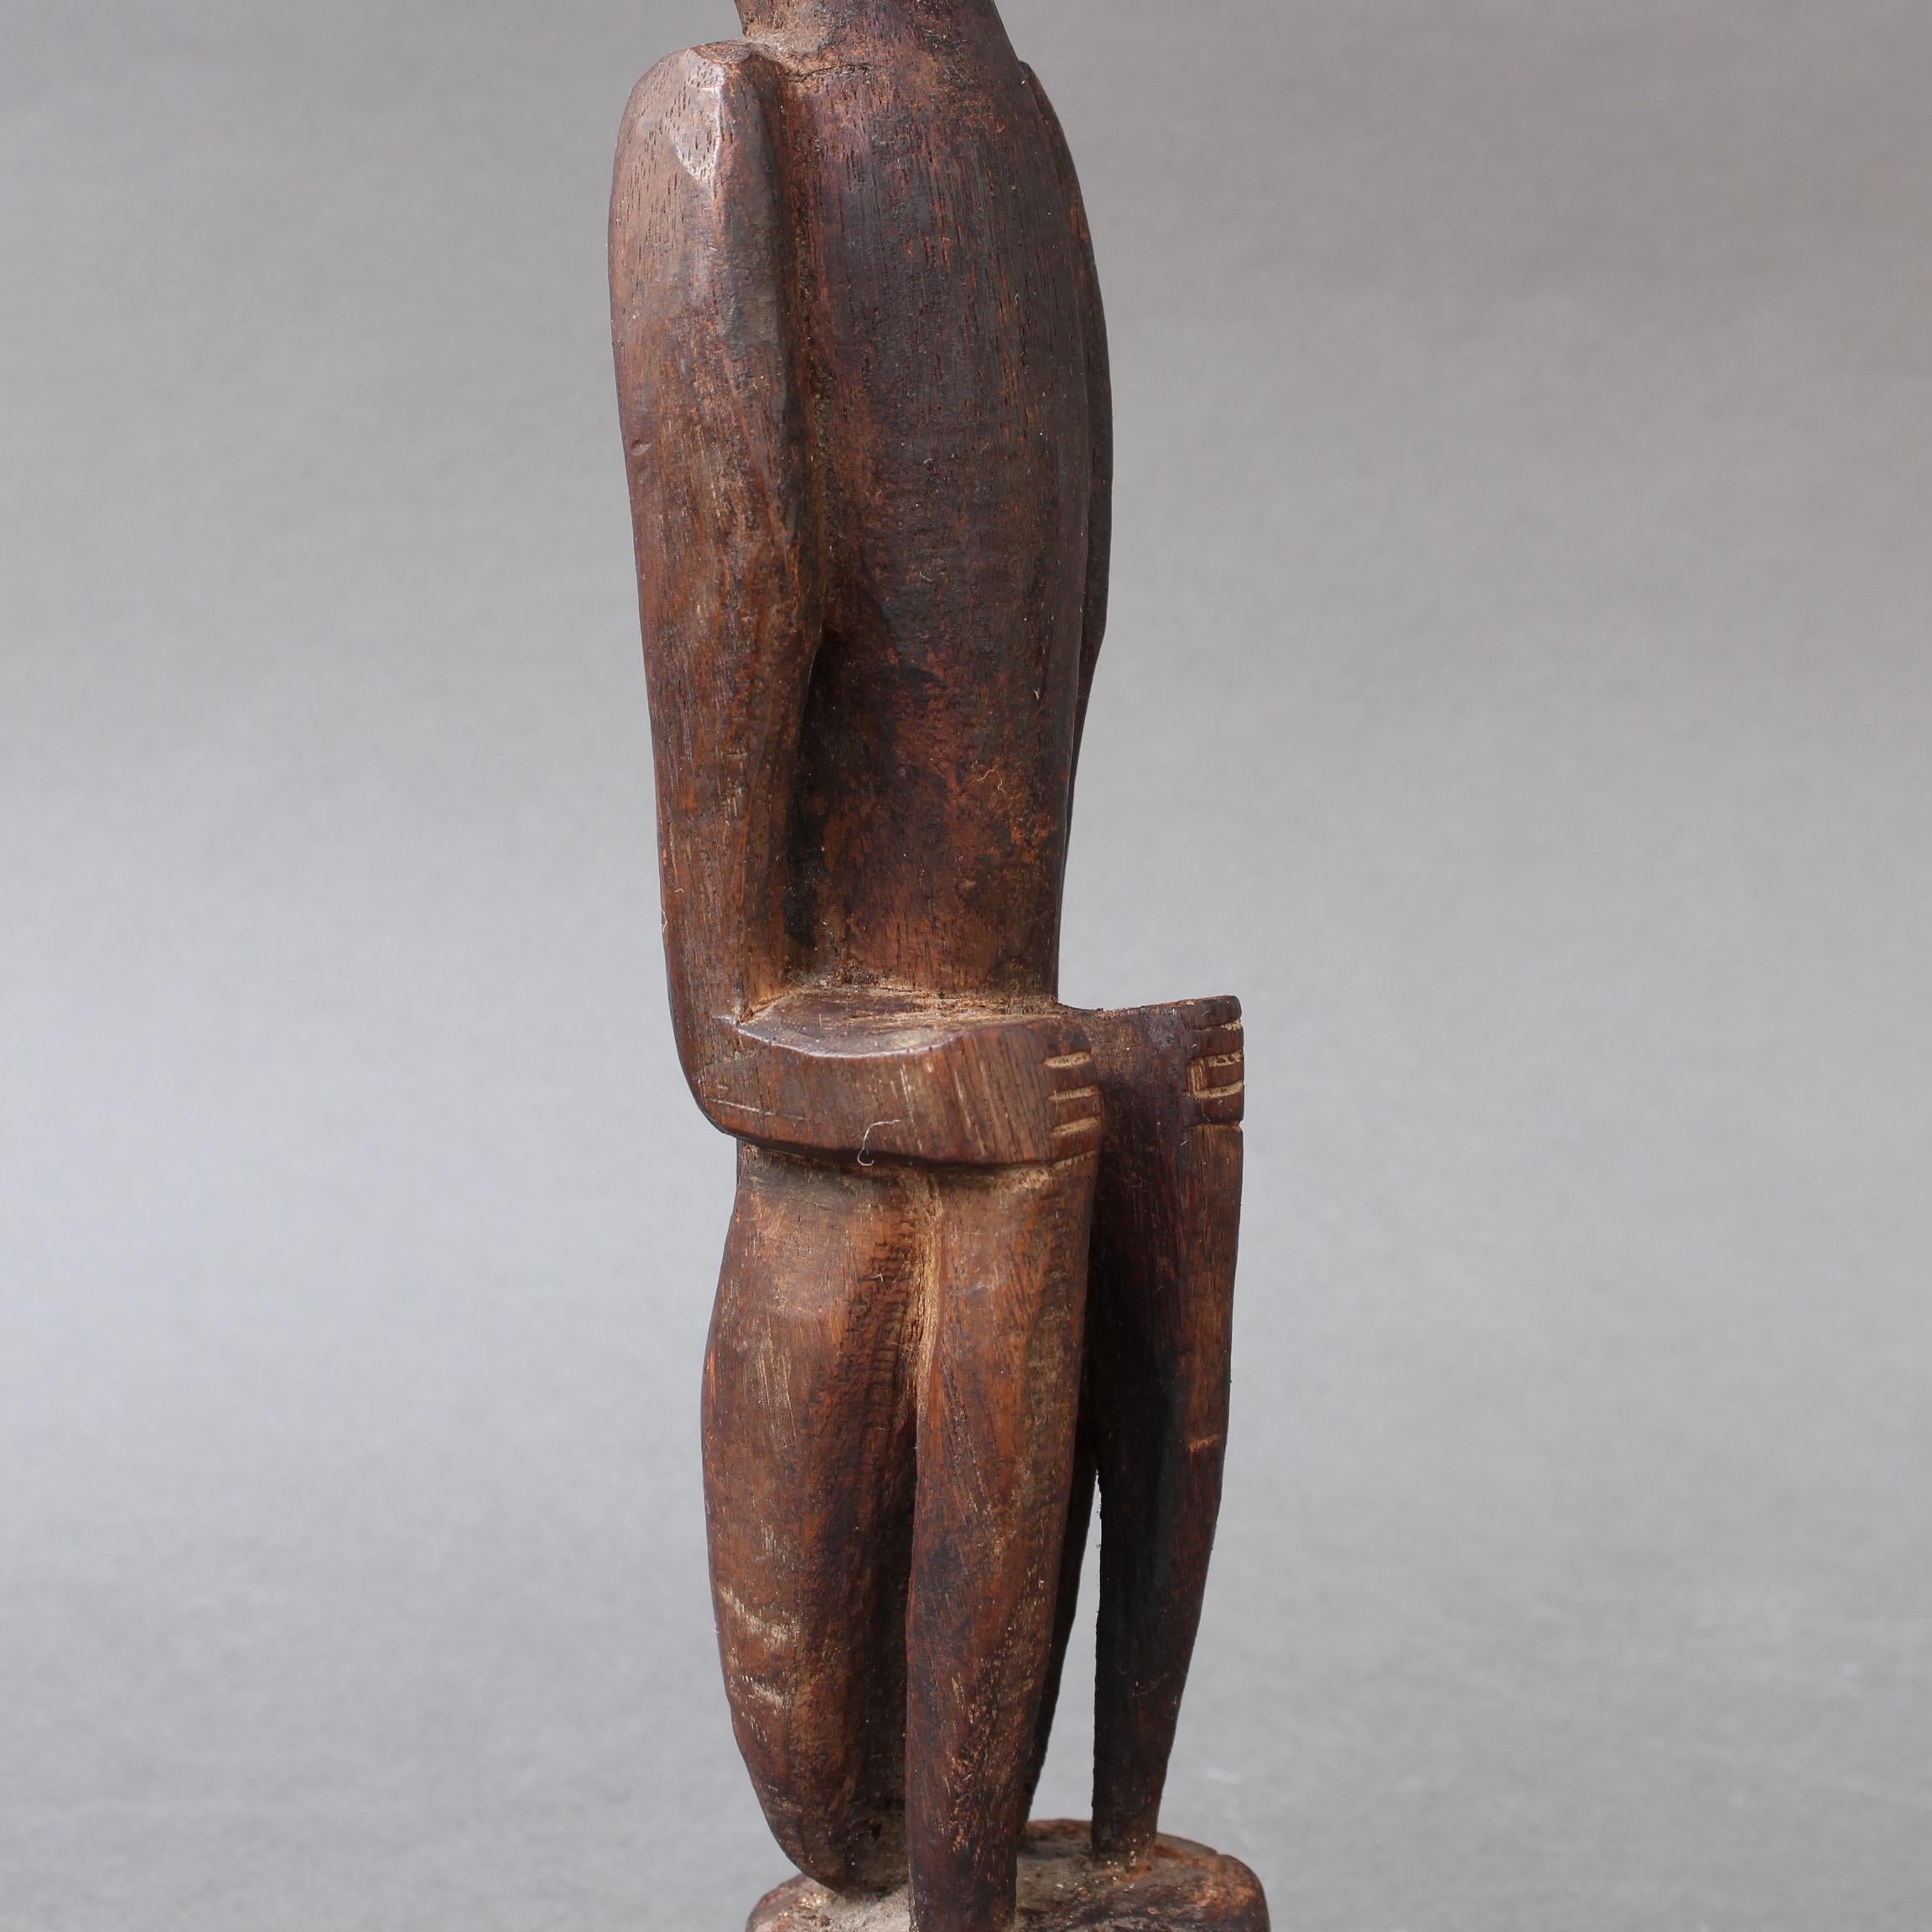 Wooden Sculpture or Carving of Sitting Figure from Sumba Island, Indonesia 9